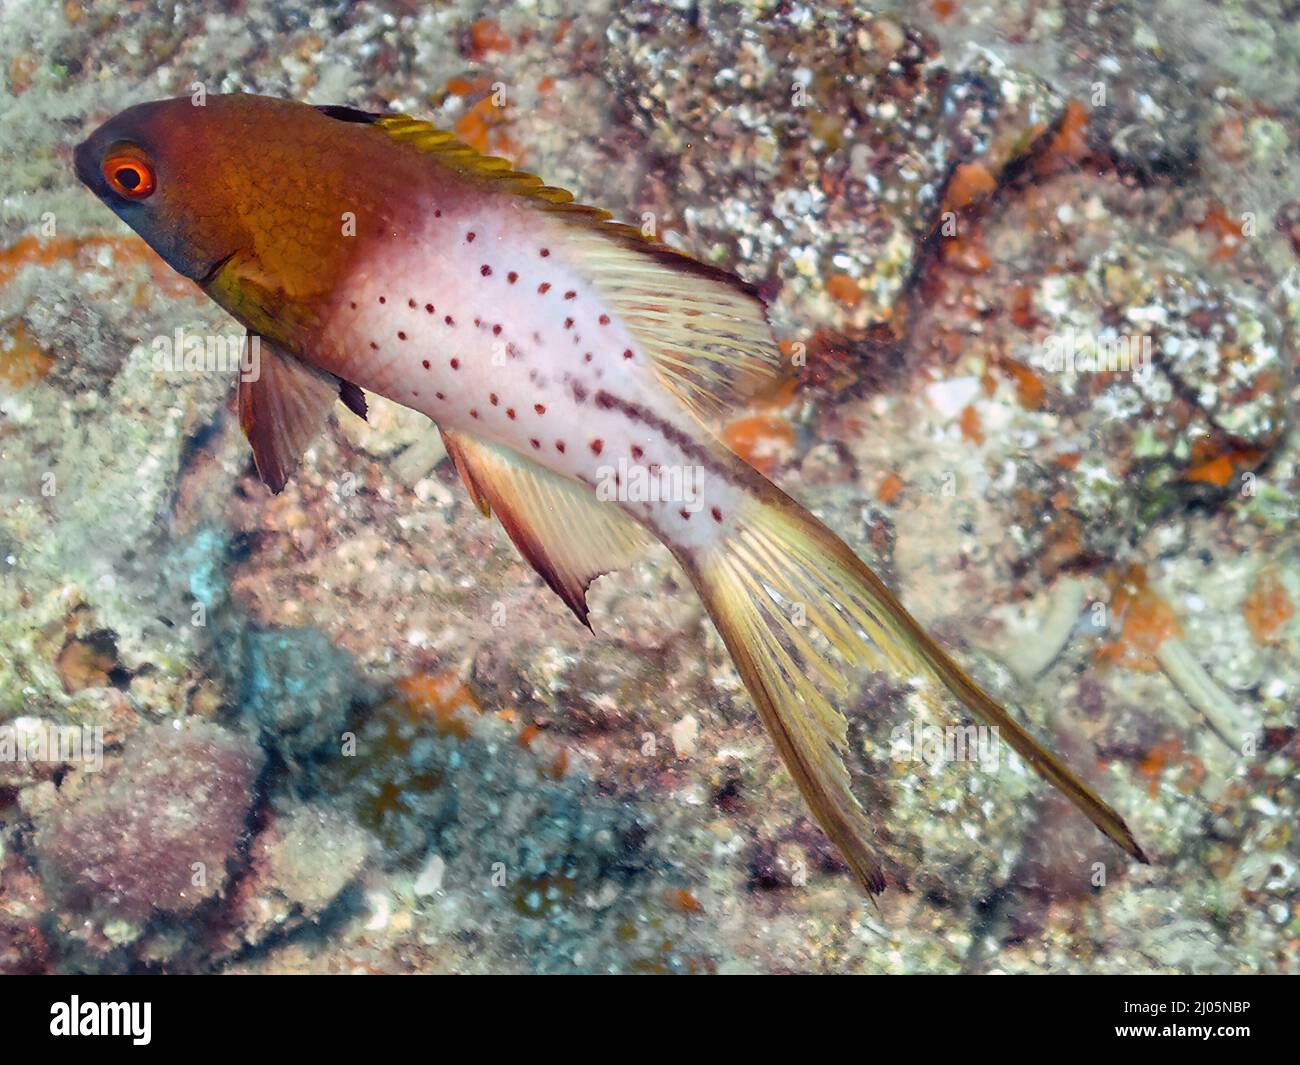 A Lyretail Hogfish (Bodianus anthiodes) in the Red Sea Stock Photo